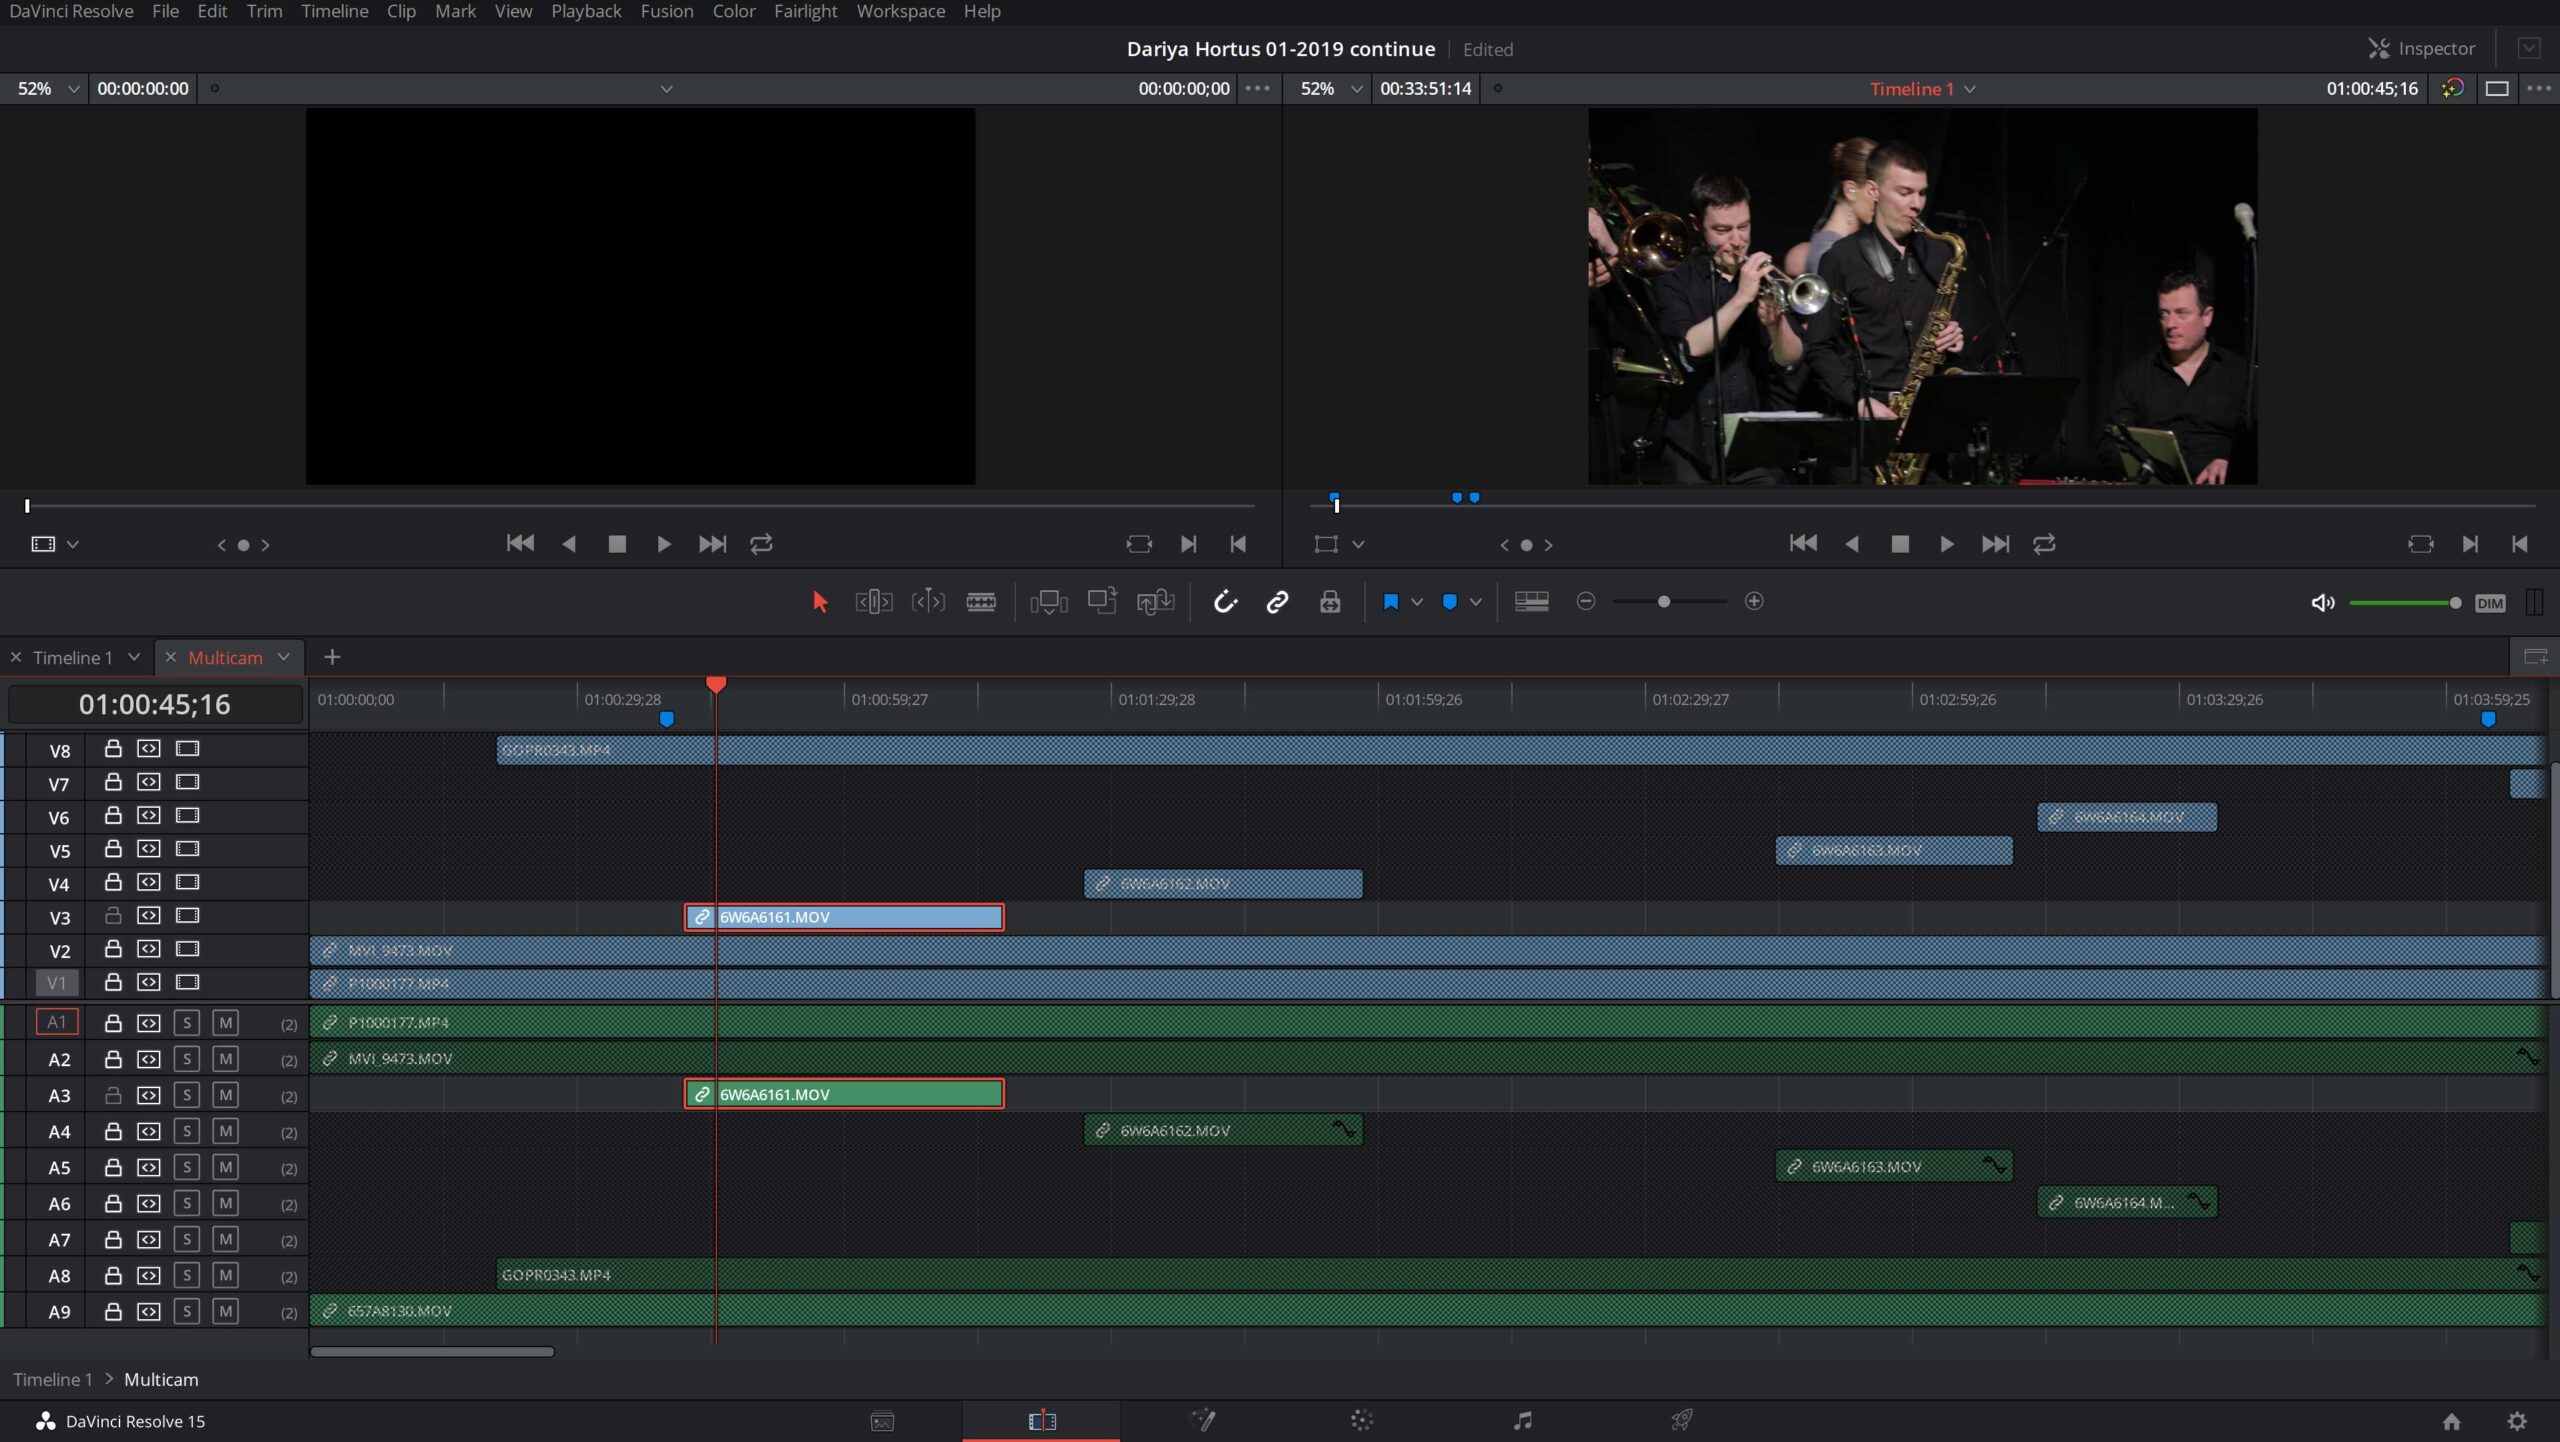 DaVinci Resolve timeline with a saxophone player in the preview window.